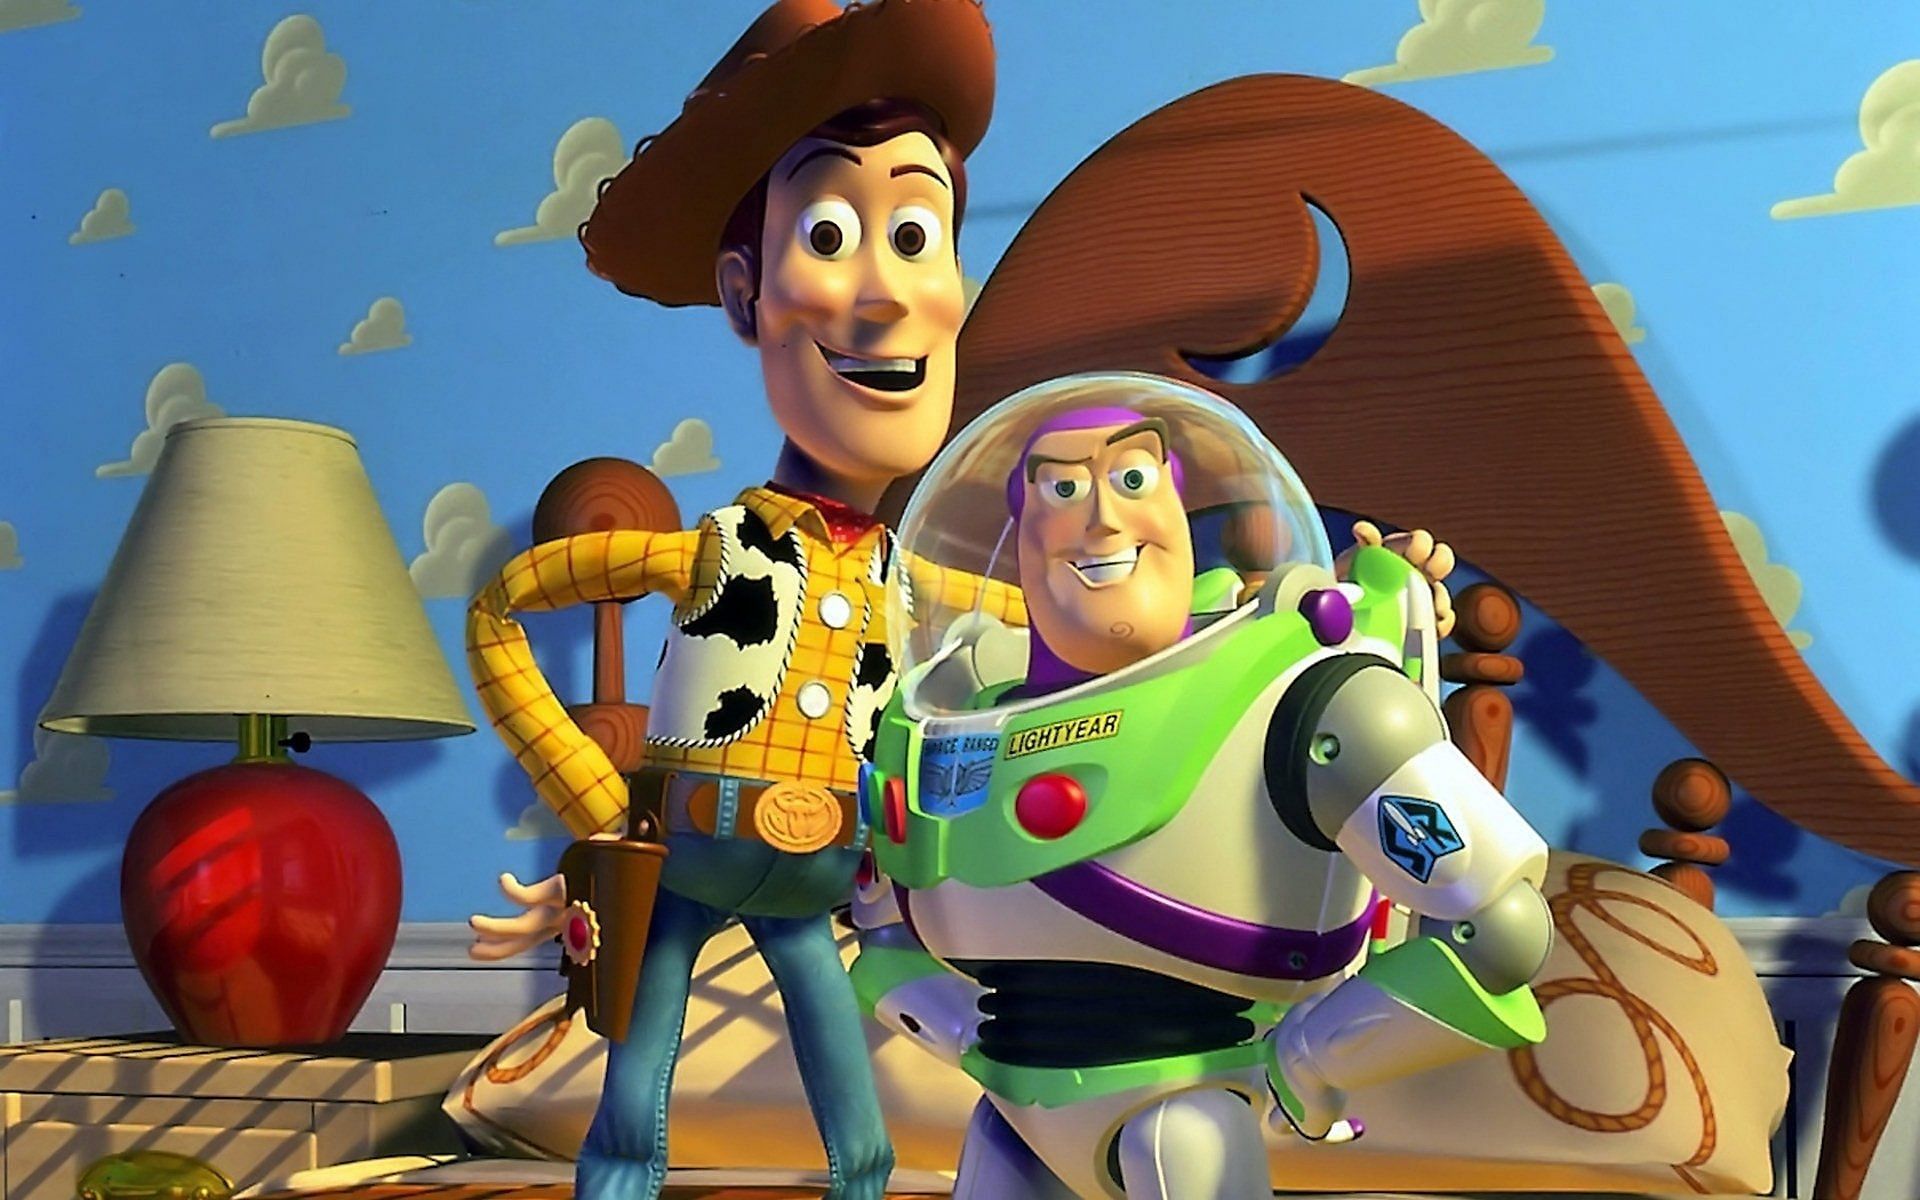 Toy Story 5 is a big maybe - but here's all you need to know